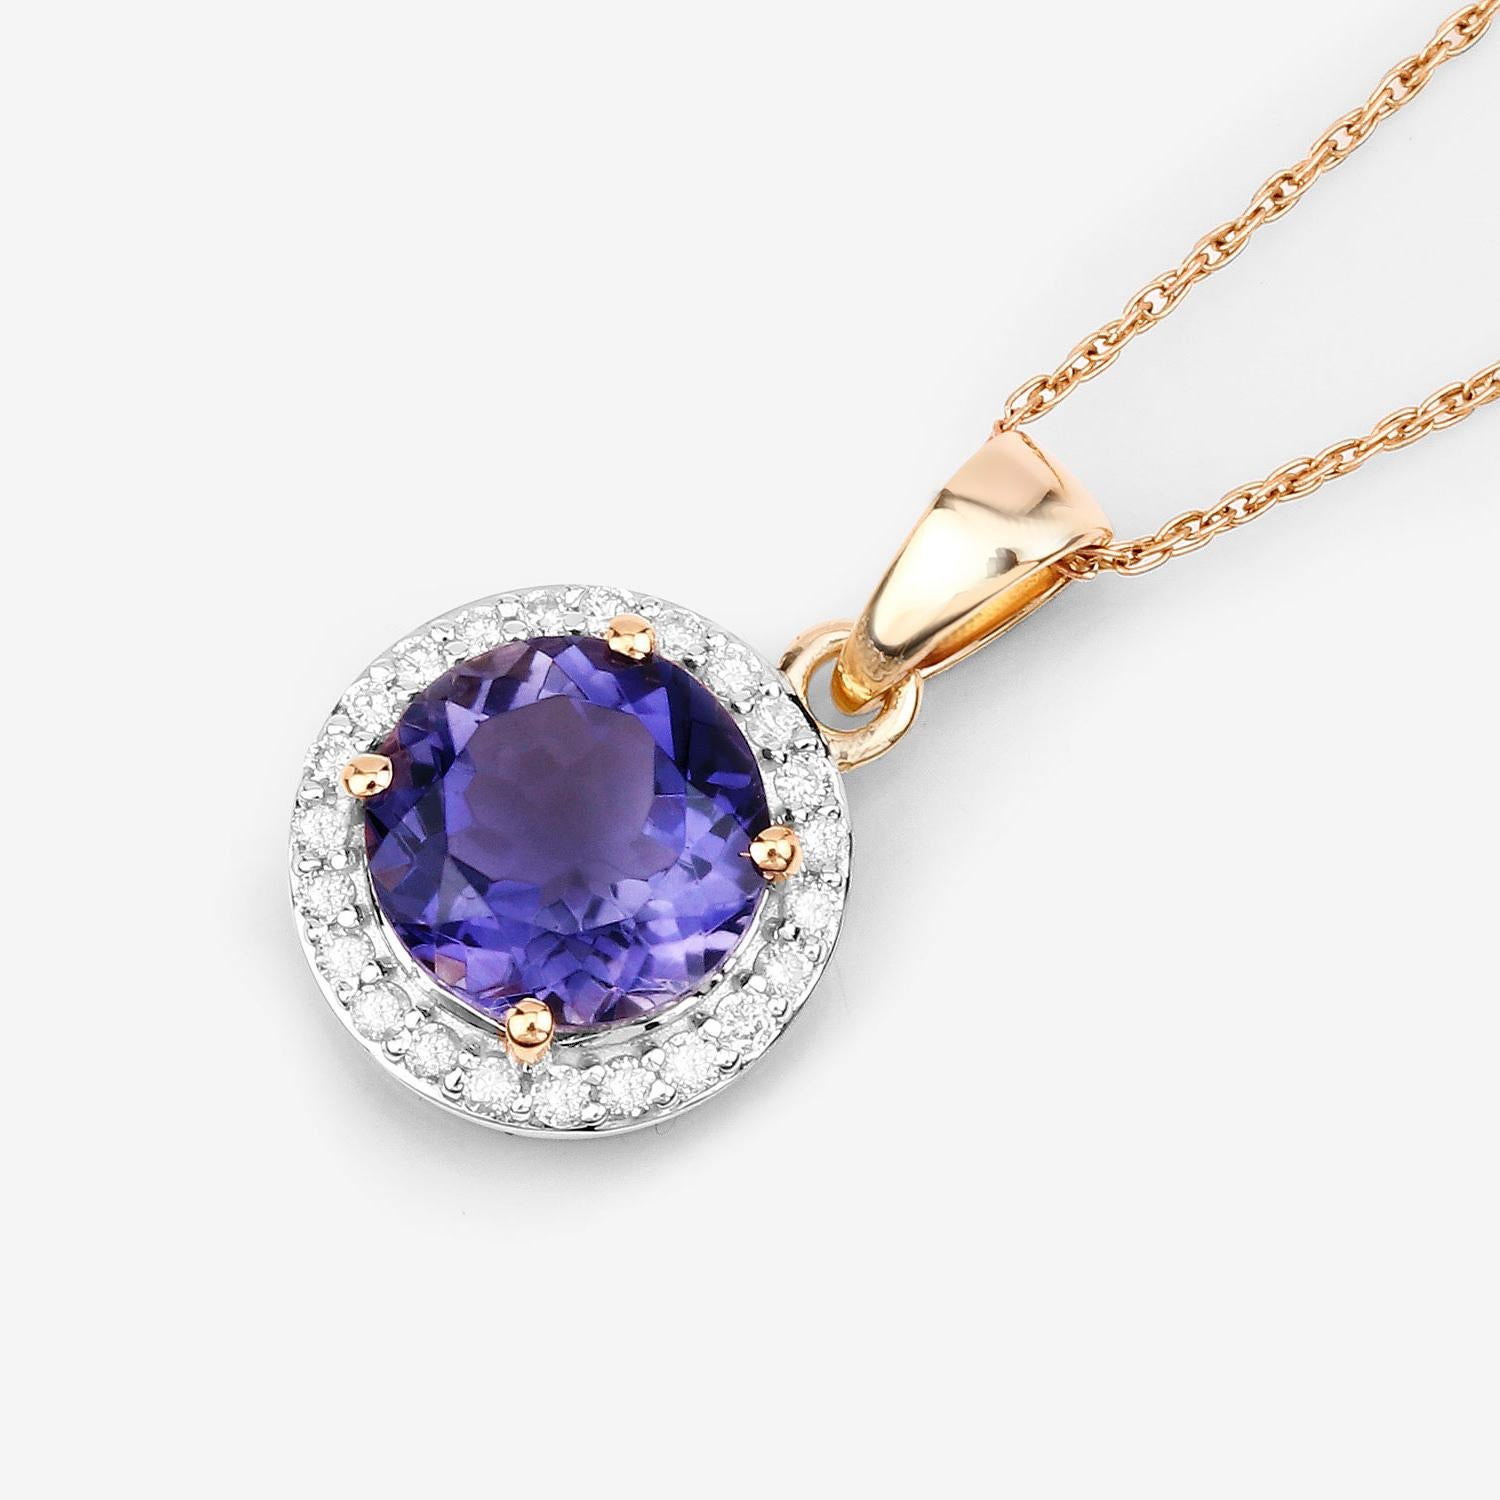 Round Cut Iolite Pendant Necklace With Diamonds 1.71 Carats 14K Yellow Gold For Sale